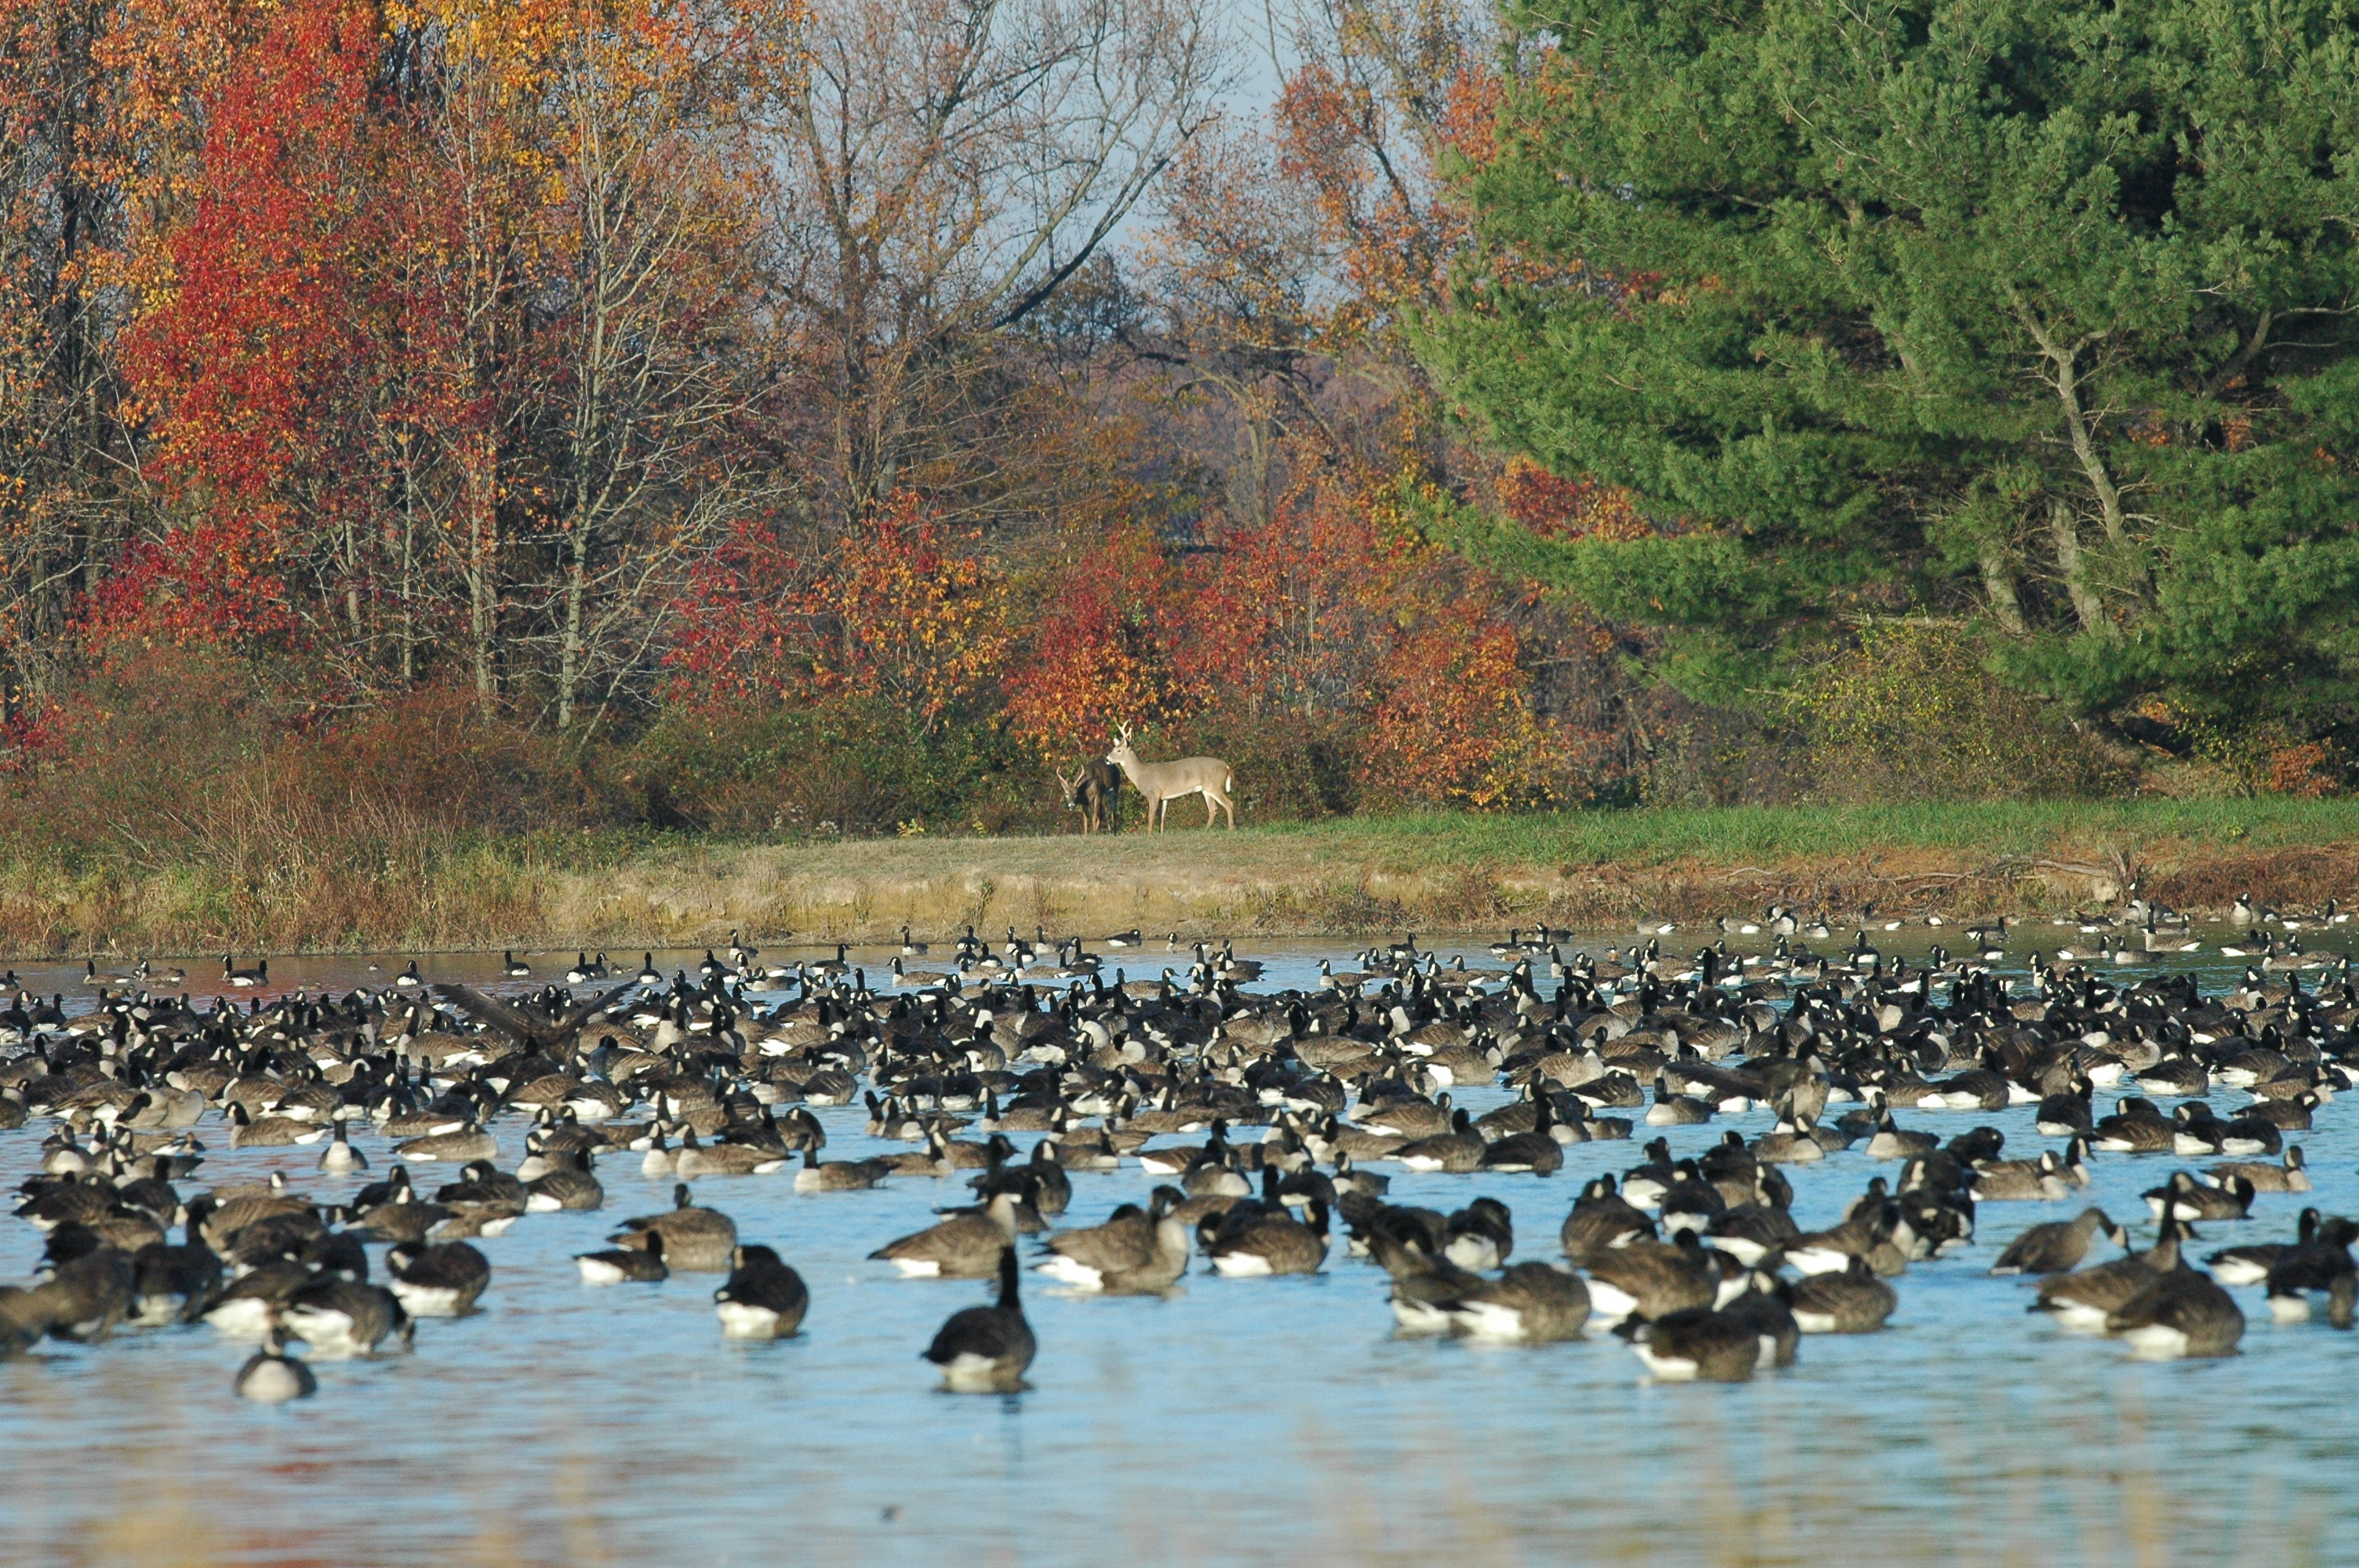 foreground pond with Canada geese behind them 2 deer stand with red and green trees as back drop